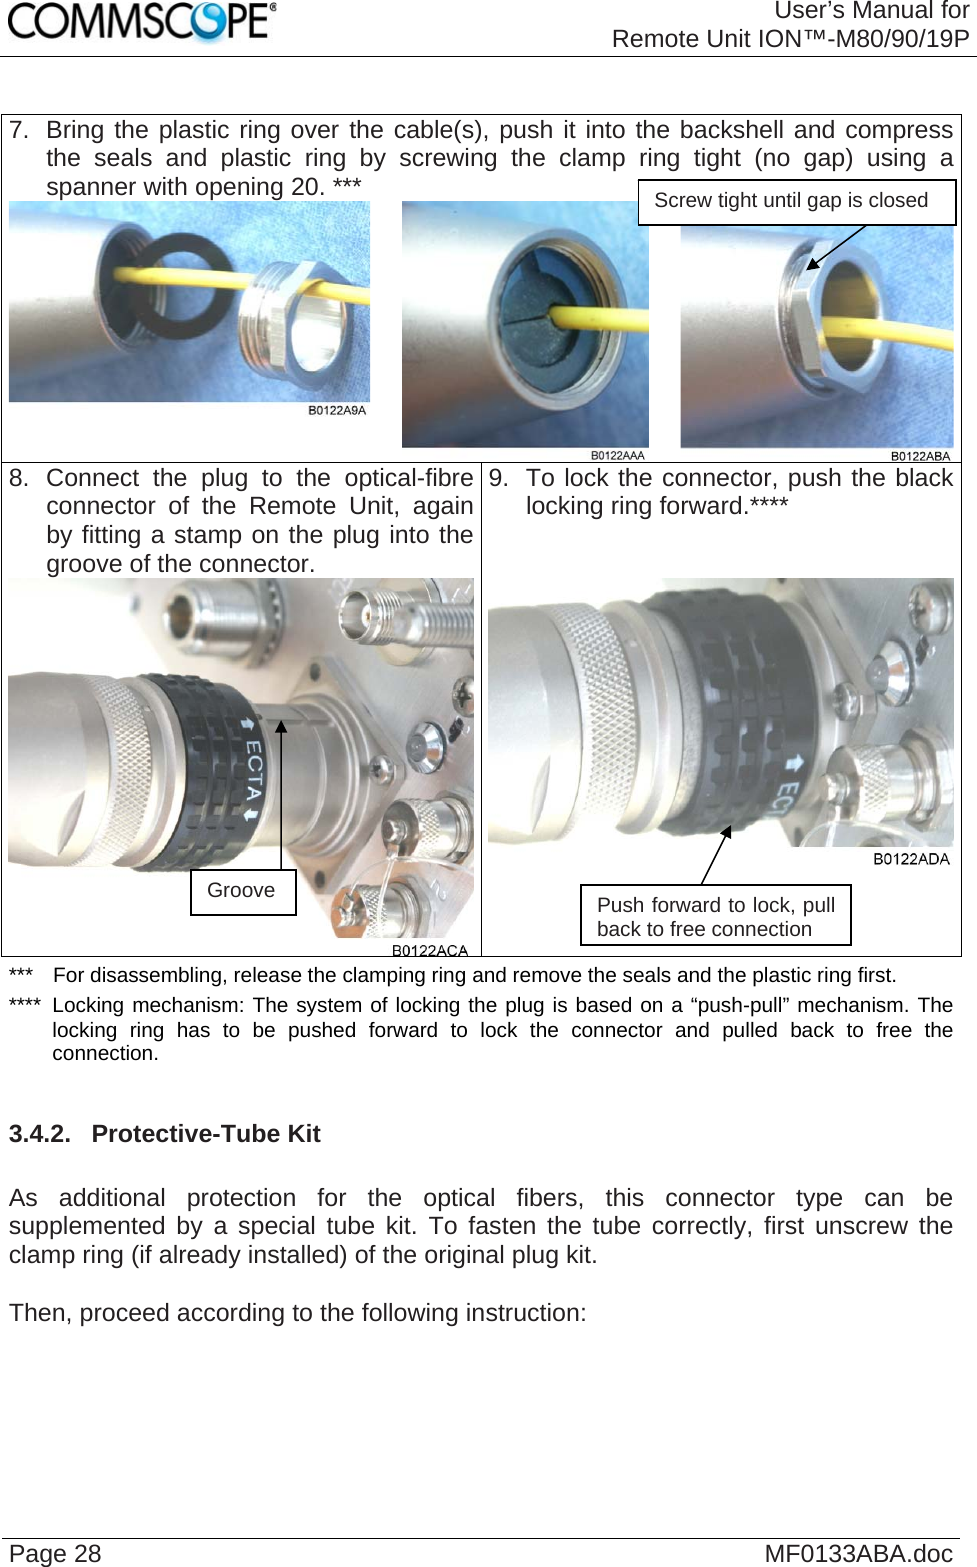 User’s Manual forRemote Unit ION™-M80/90/19P Page 28  MF0133ABA.doc 7.  Bring the plastic ring over the cable(s), push it into the backshell and compress the seals and plastic ring by screwing the clamp ring tight (no gap) using a spanner with opening 20. ***   8. Connect the plug to the optical-fibre connector of the Remote Unit, again by fitting a stamp on the plug into the groove of the connector.  9.  To lock the connector, push the black locking ring forward.****  Screw tight until gap is closed  ***  For disassembling, release the clamping ring and remove the seals and the plastic ring first. ****  Locking mechanism: The system of locking the plug is based on a “push-pull” mechanism. The locking ring has to be pushed forward to lock the connector and pulled back to free the connection.  3.4.2.  Protective-Tube Kit  As additional protection for the optical fibers, this connector type can be supplemented by a special tube kit. To fasten the tube correctly, first unscrew the clamp ring (if already installed) of the original plug kit.   Then, proceed according to the following instruction: Groove  Push forward to lock, pull back to free connection 